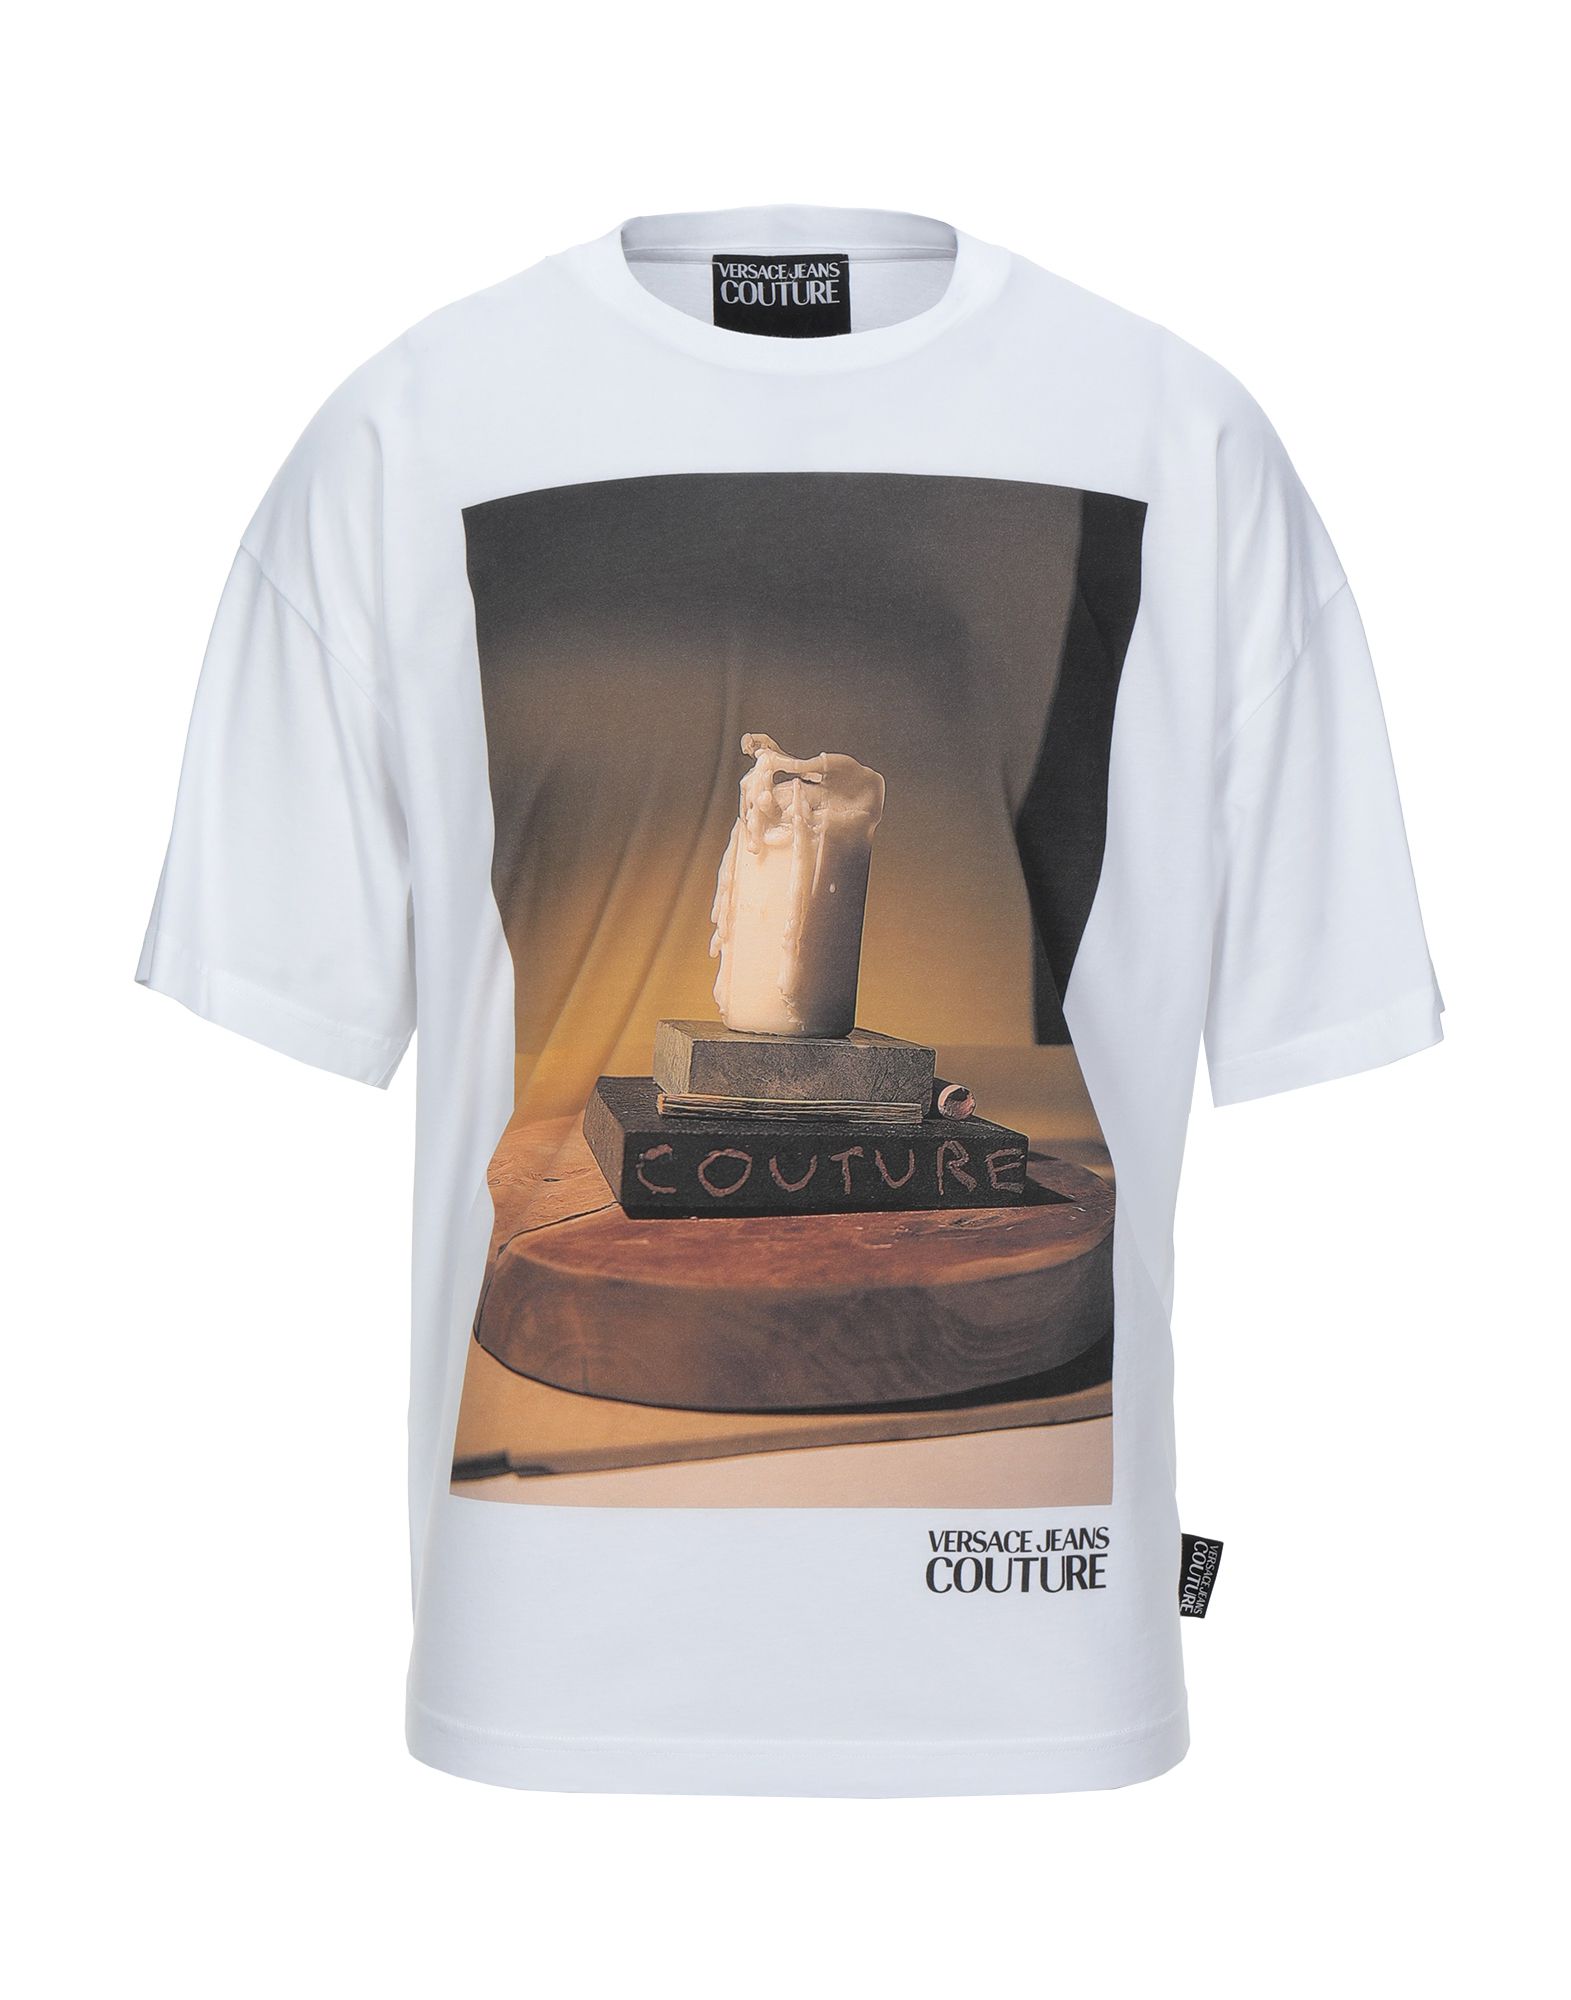 VERSACE JEANS COUTURE T-shirts - Item 12488574